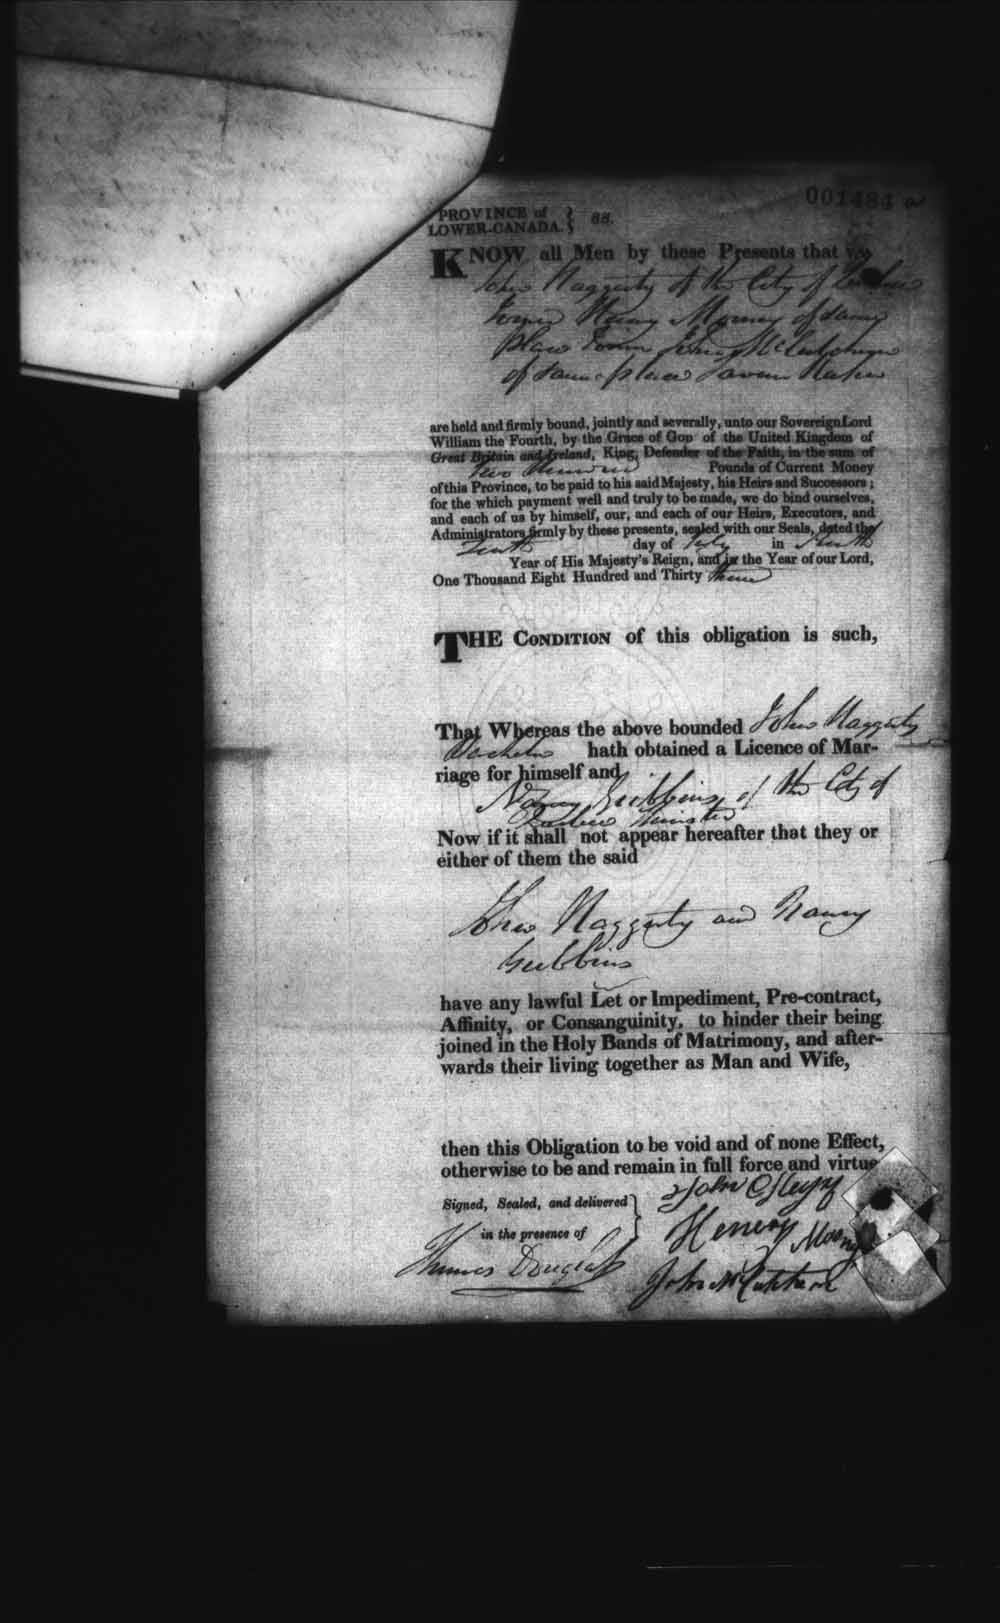 Digitized page of Upper and Lower Canada Marriage Bonds (1779-1865) for Image No.: e008237771